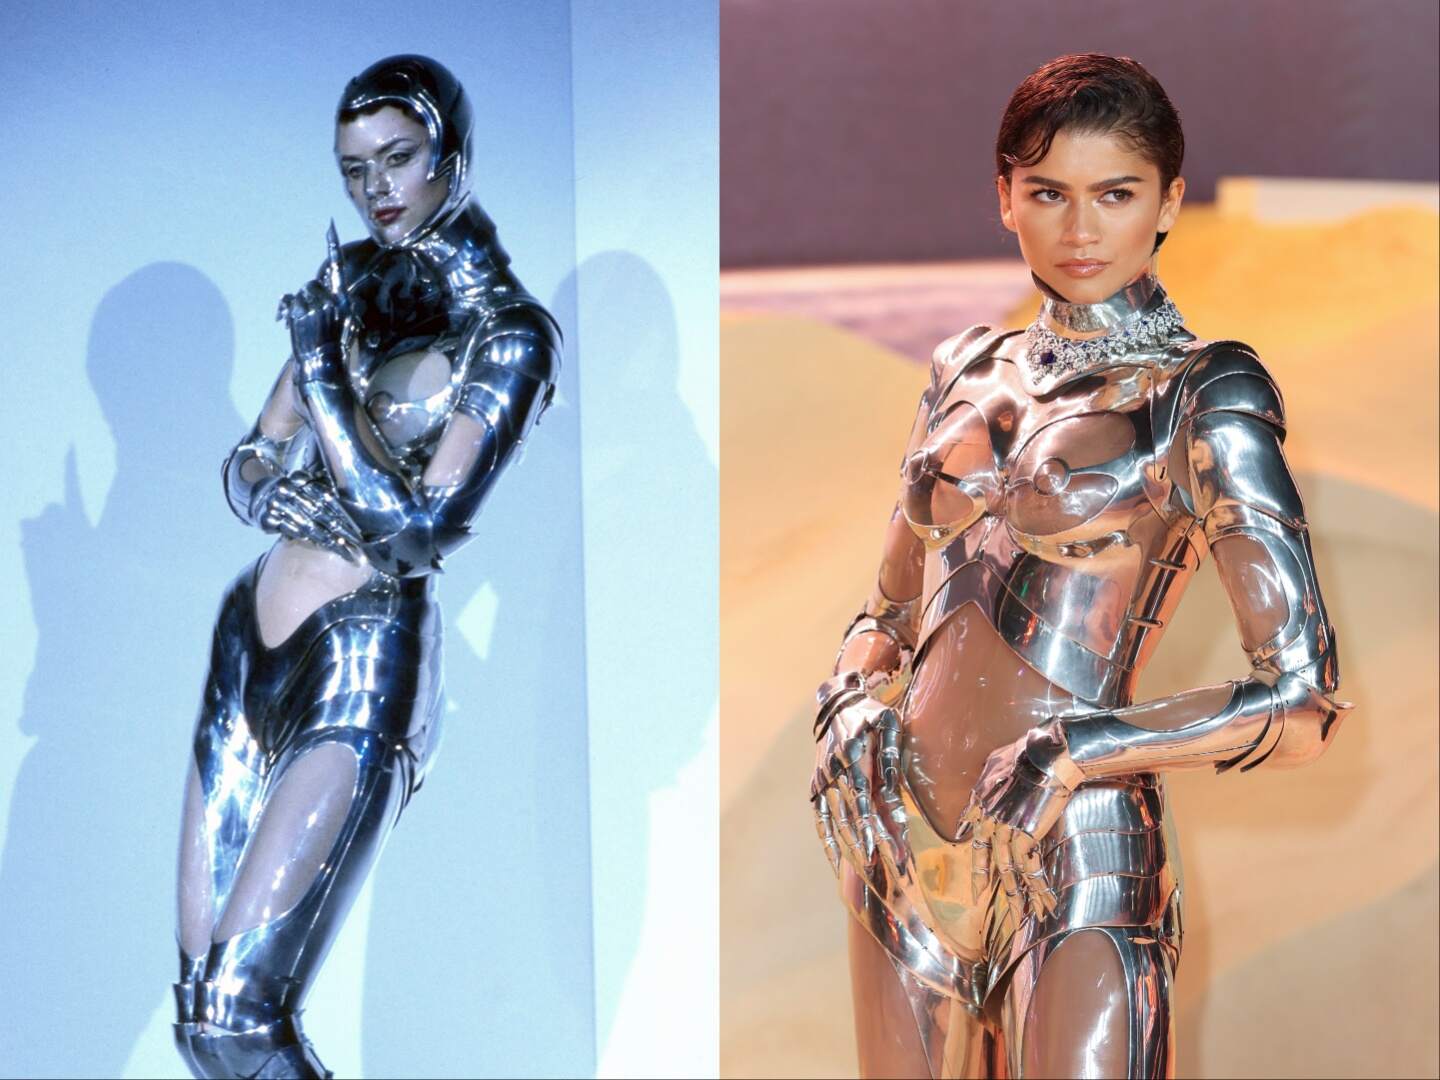 Photo of a model wearing a metal Mugler outfit alongside a photo of Zendaya wearing the same Mugler outfit 30 years later